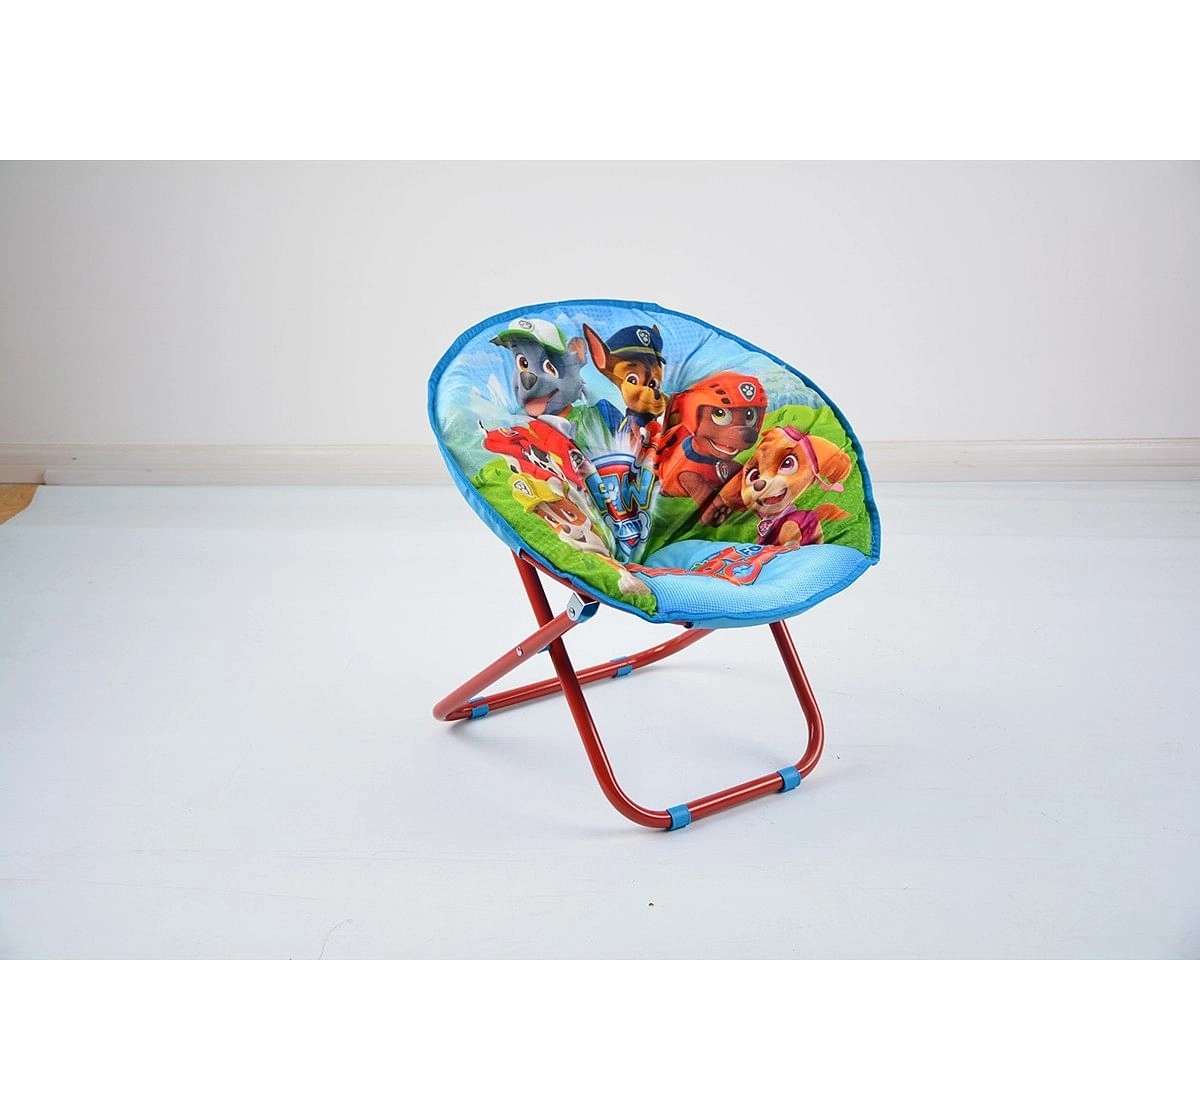 Flourish  Paw Patrol Moon Chair Outdoor Leisure for Kids age 3Y+ 